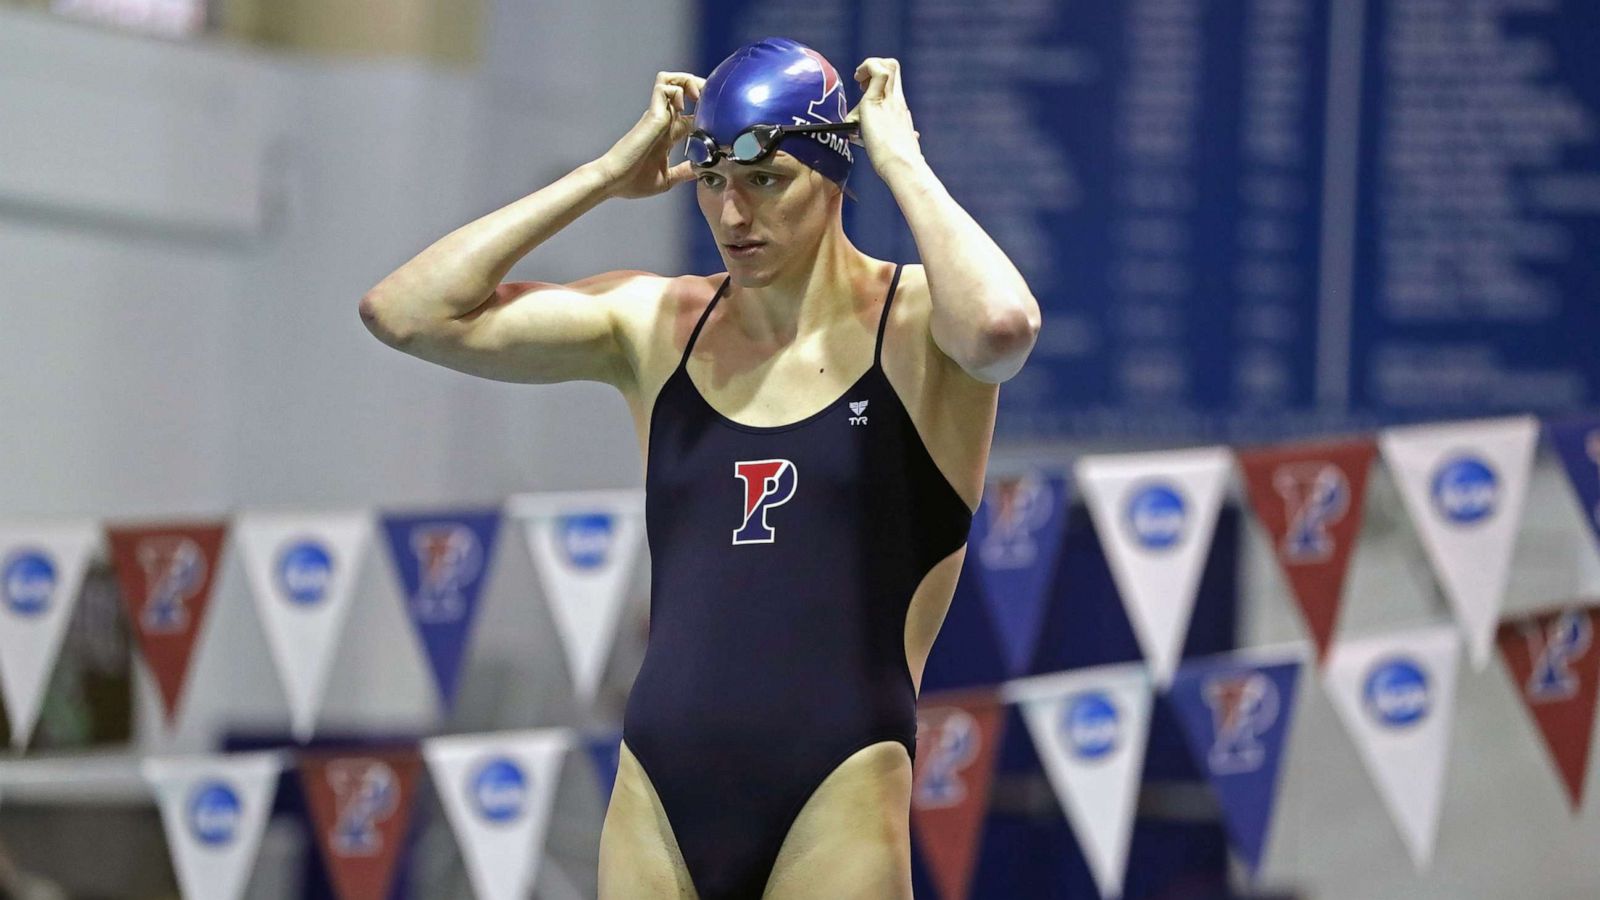 Transgender swimmer Lia Thomas speaks out about backlash, future plans to compete pic